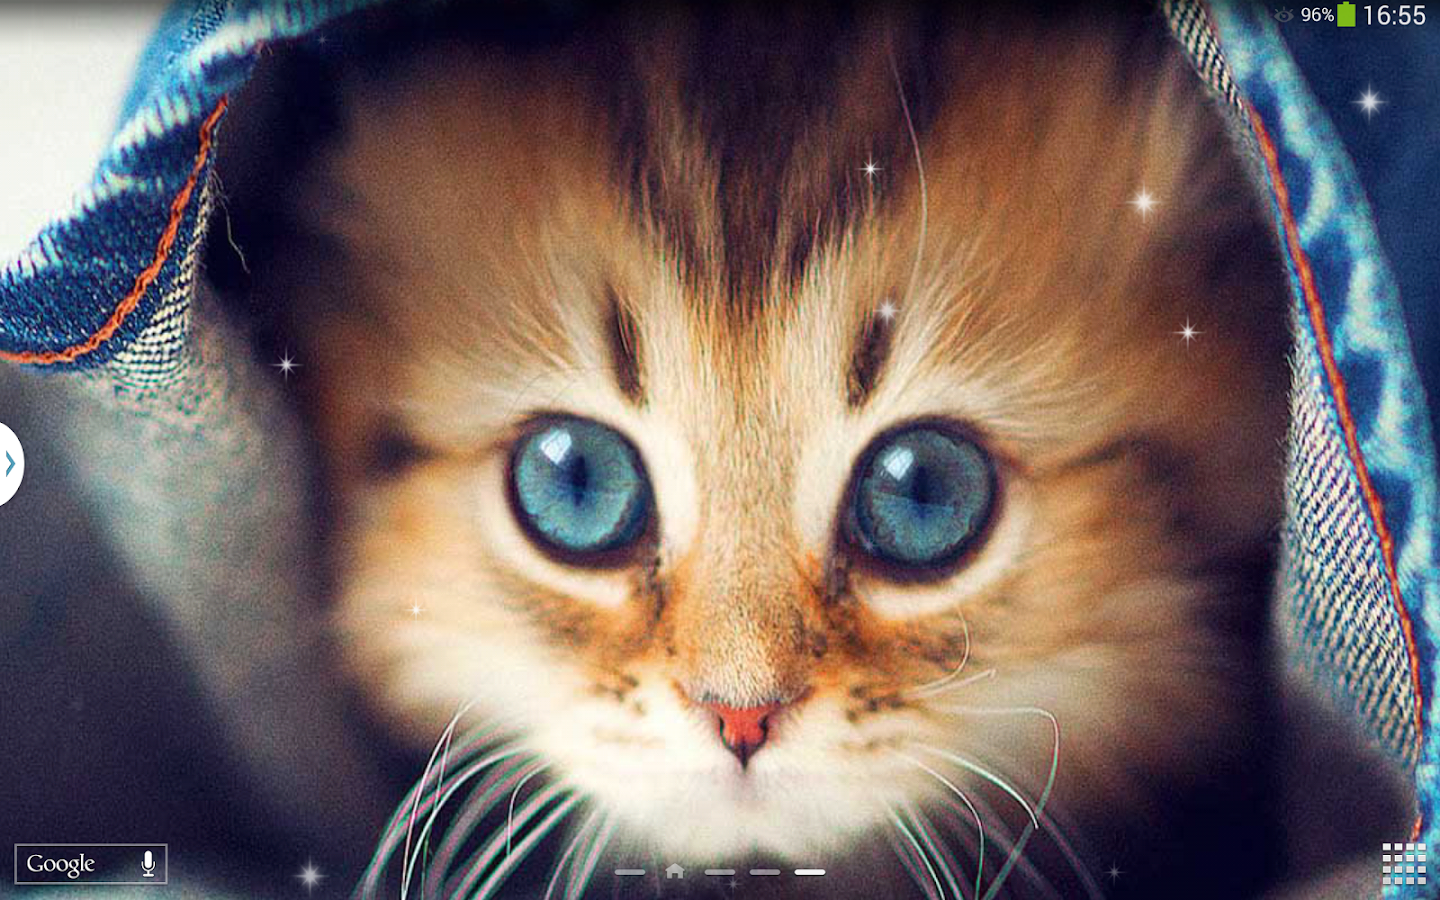  Cute  Cats  Live  Wallpaper  Android Apps on Google Play